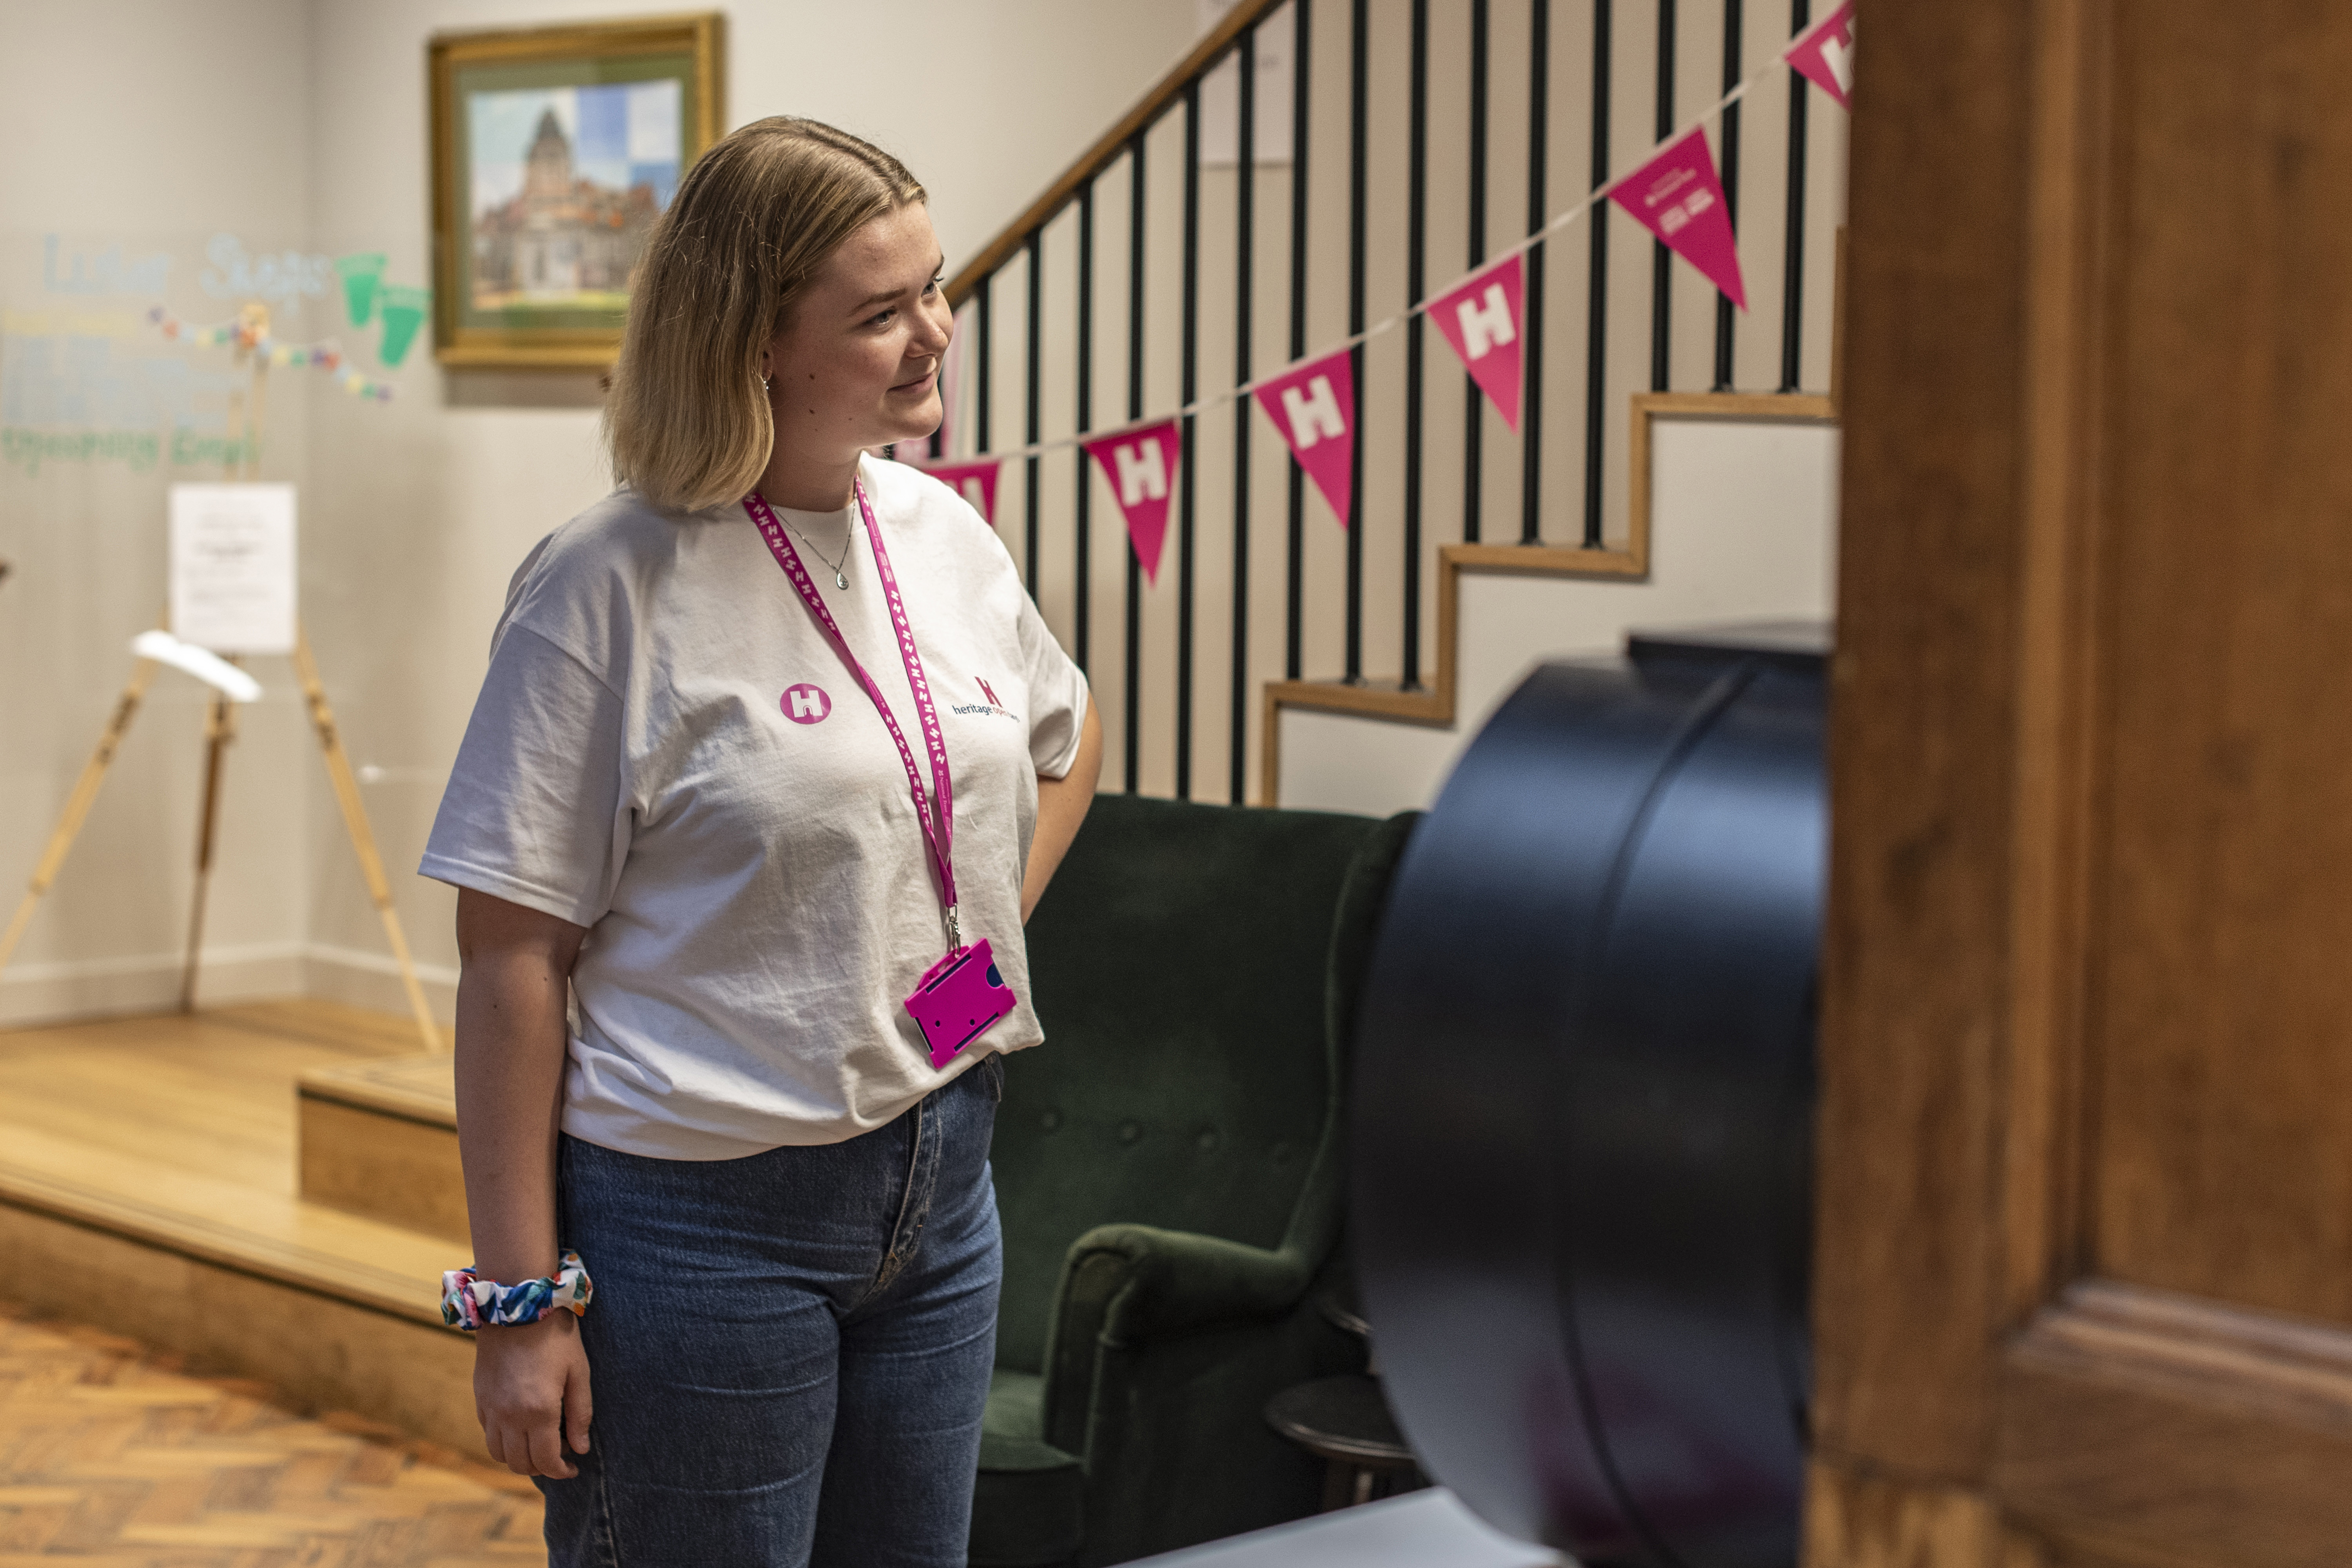 A lady wearing a white shirt with HODs logo, A HODs logo lanyard standing in a lobby with pink bunting running up the stairs